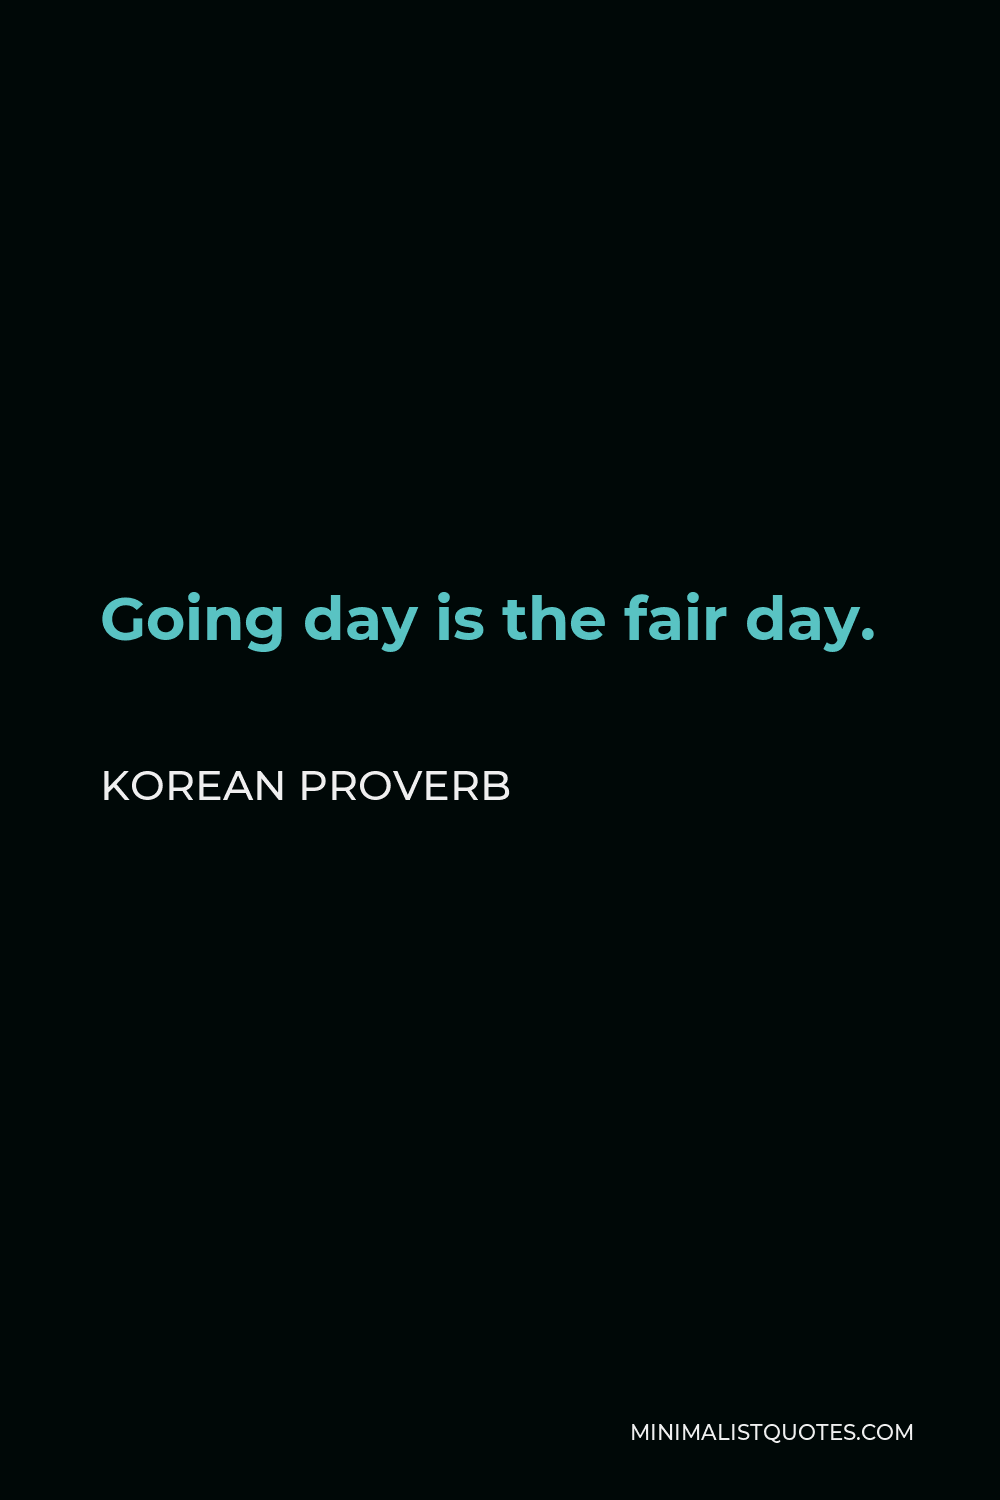 Korean Proverb Quote - Going day is the fair day.